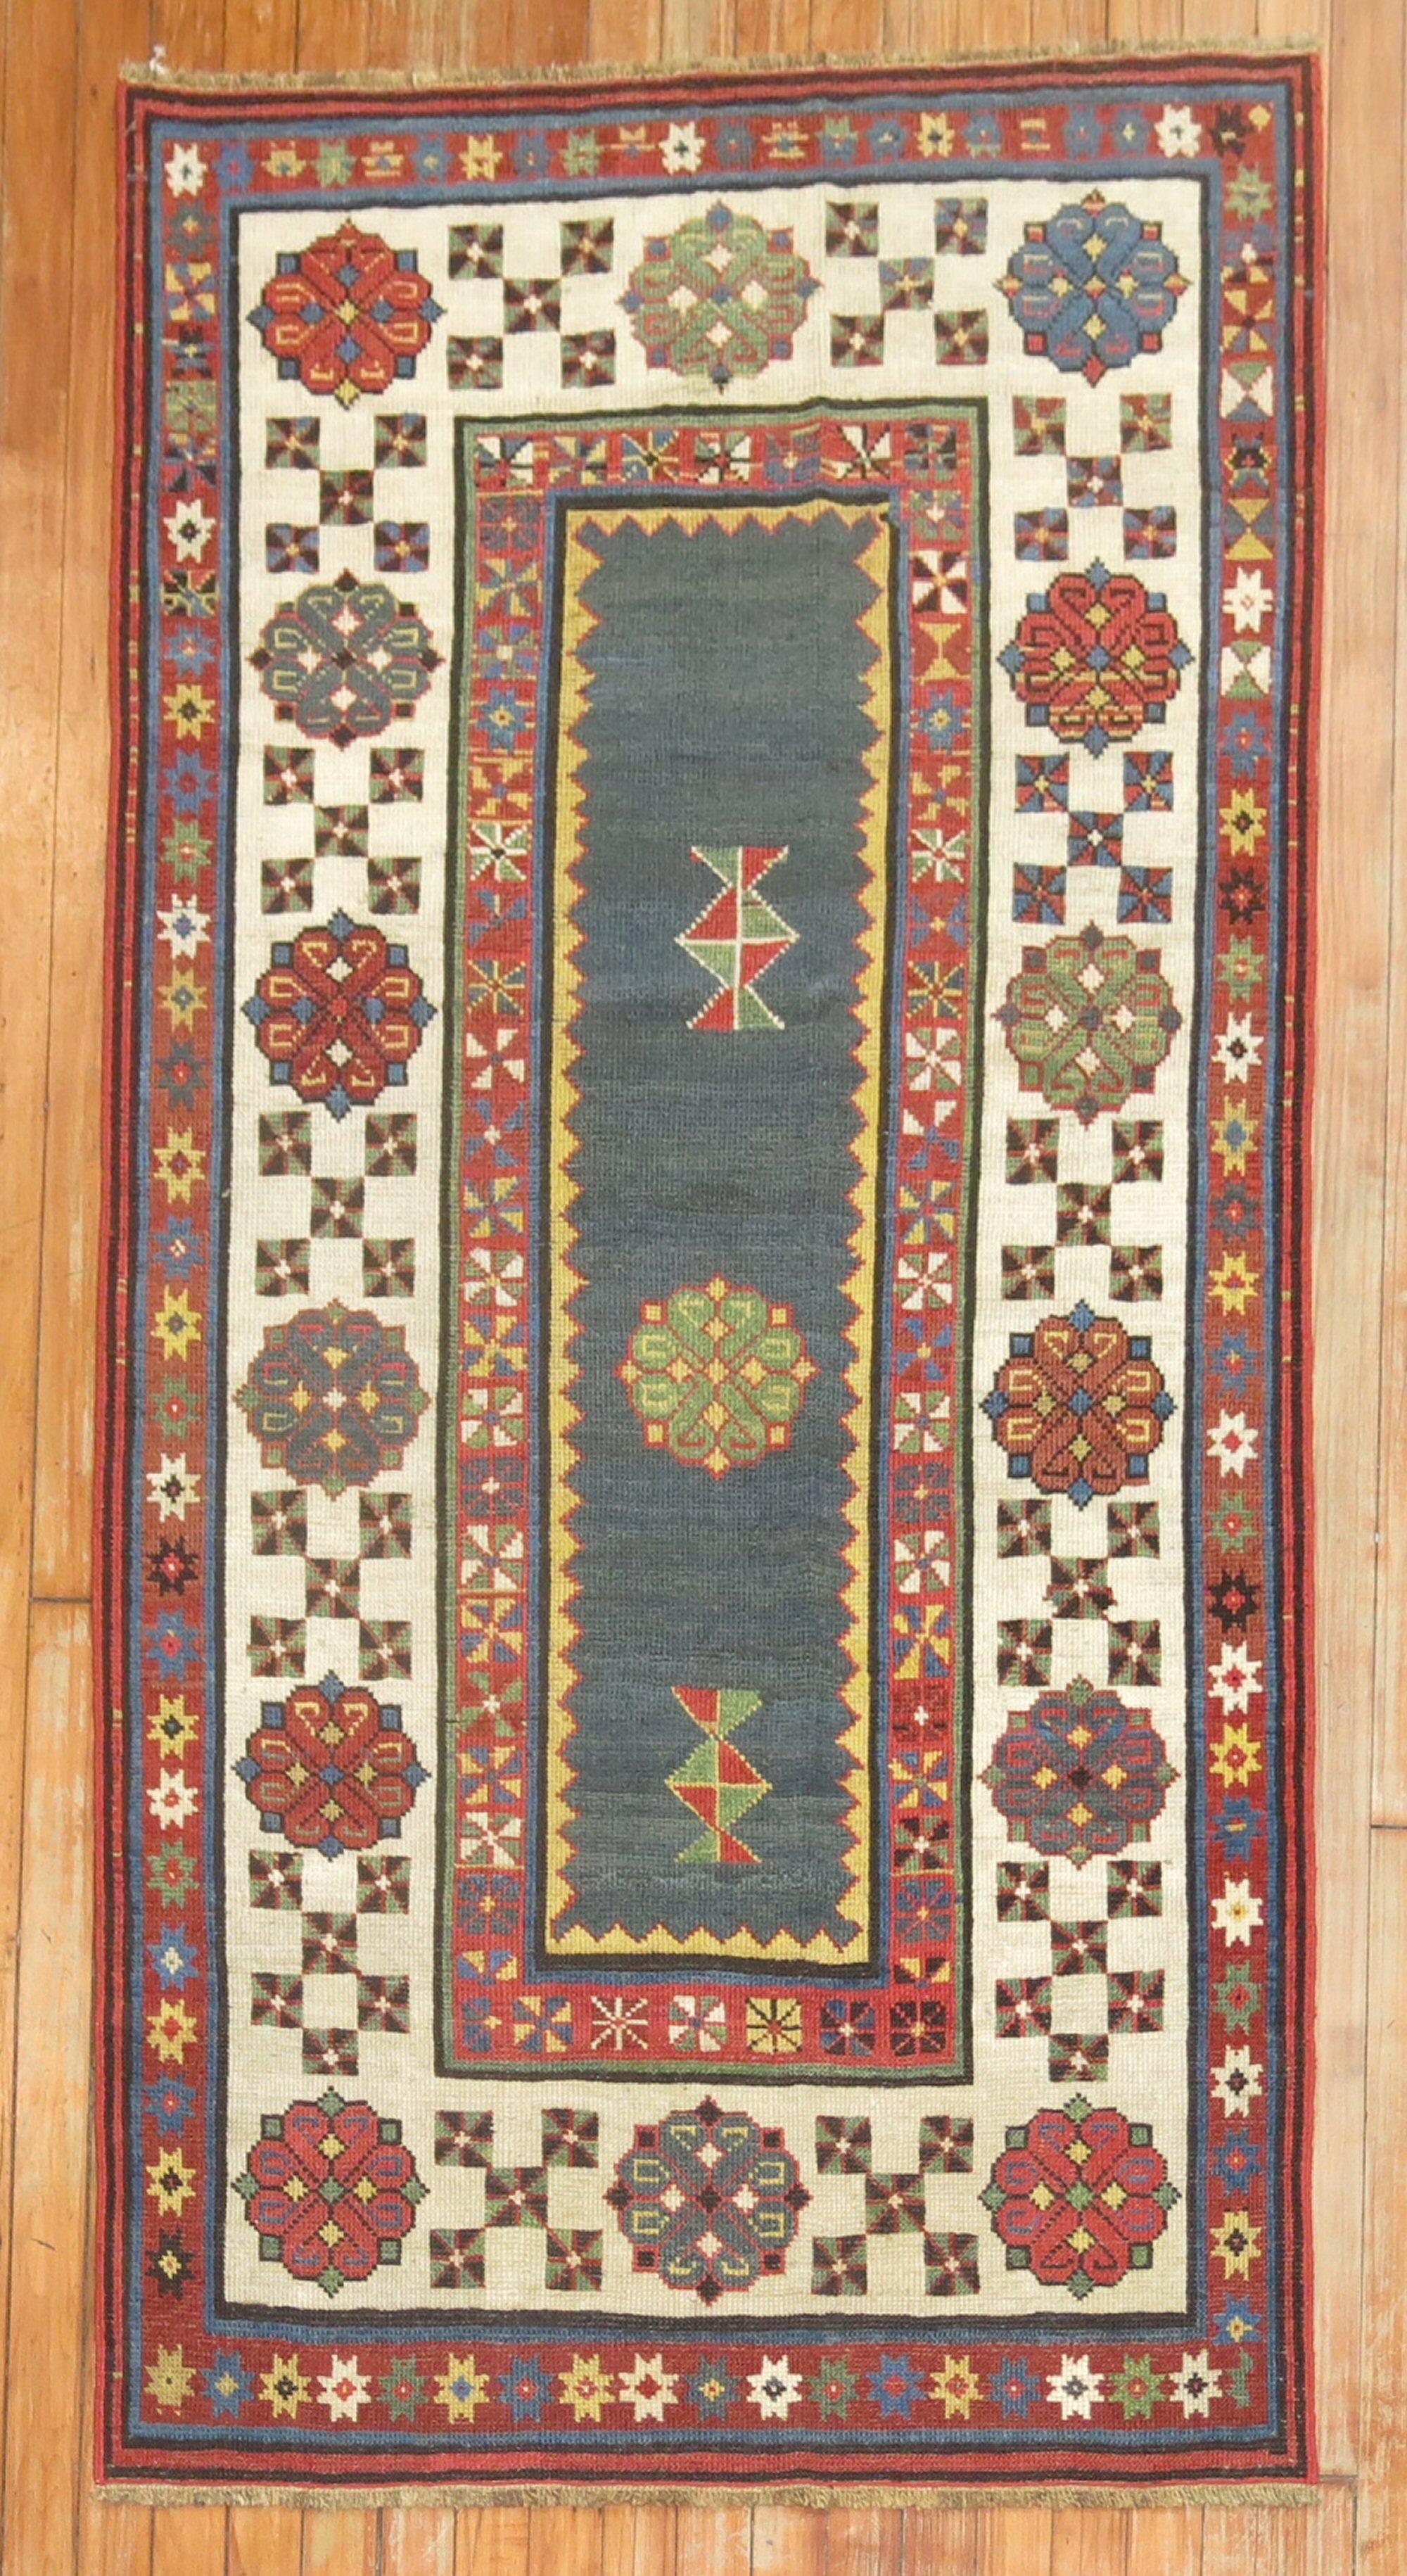 A late 19th-century Caucasian Tribal Talish Runner

Measures: 3'1